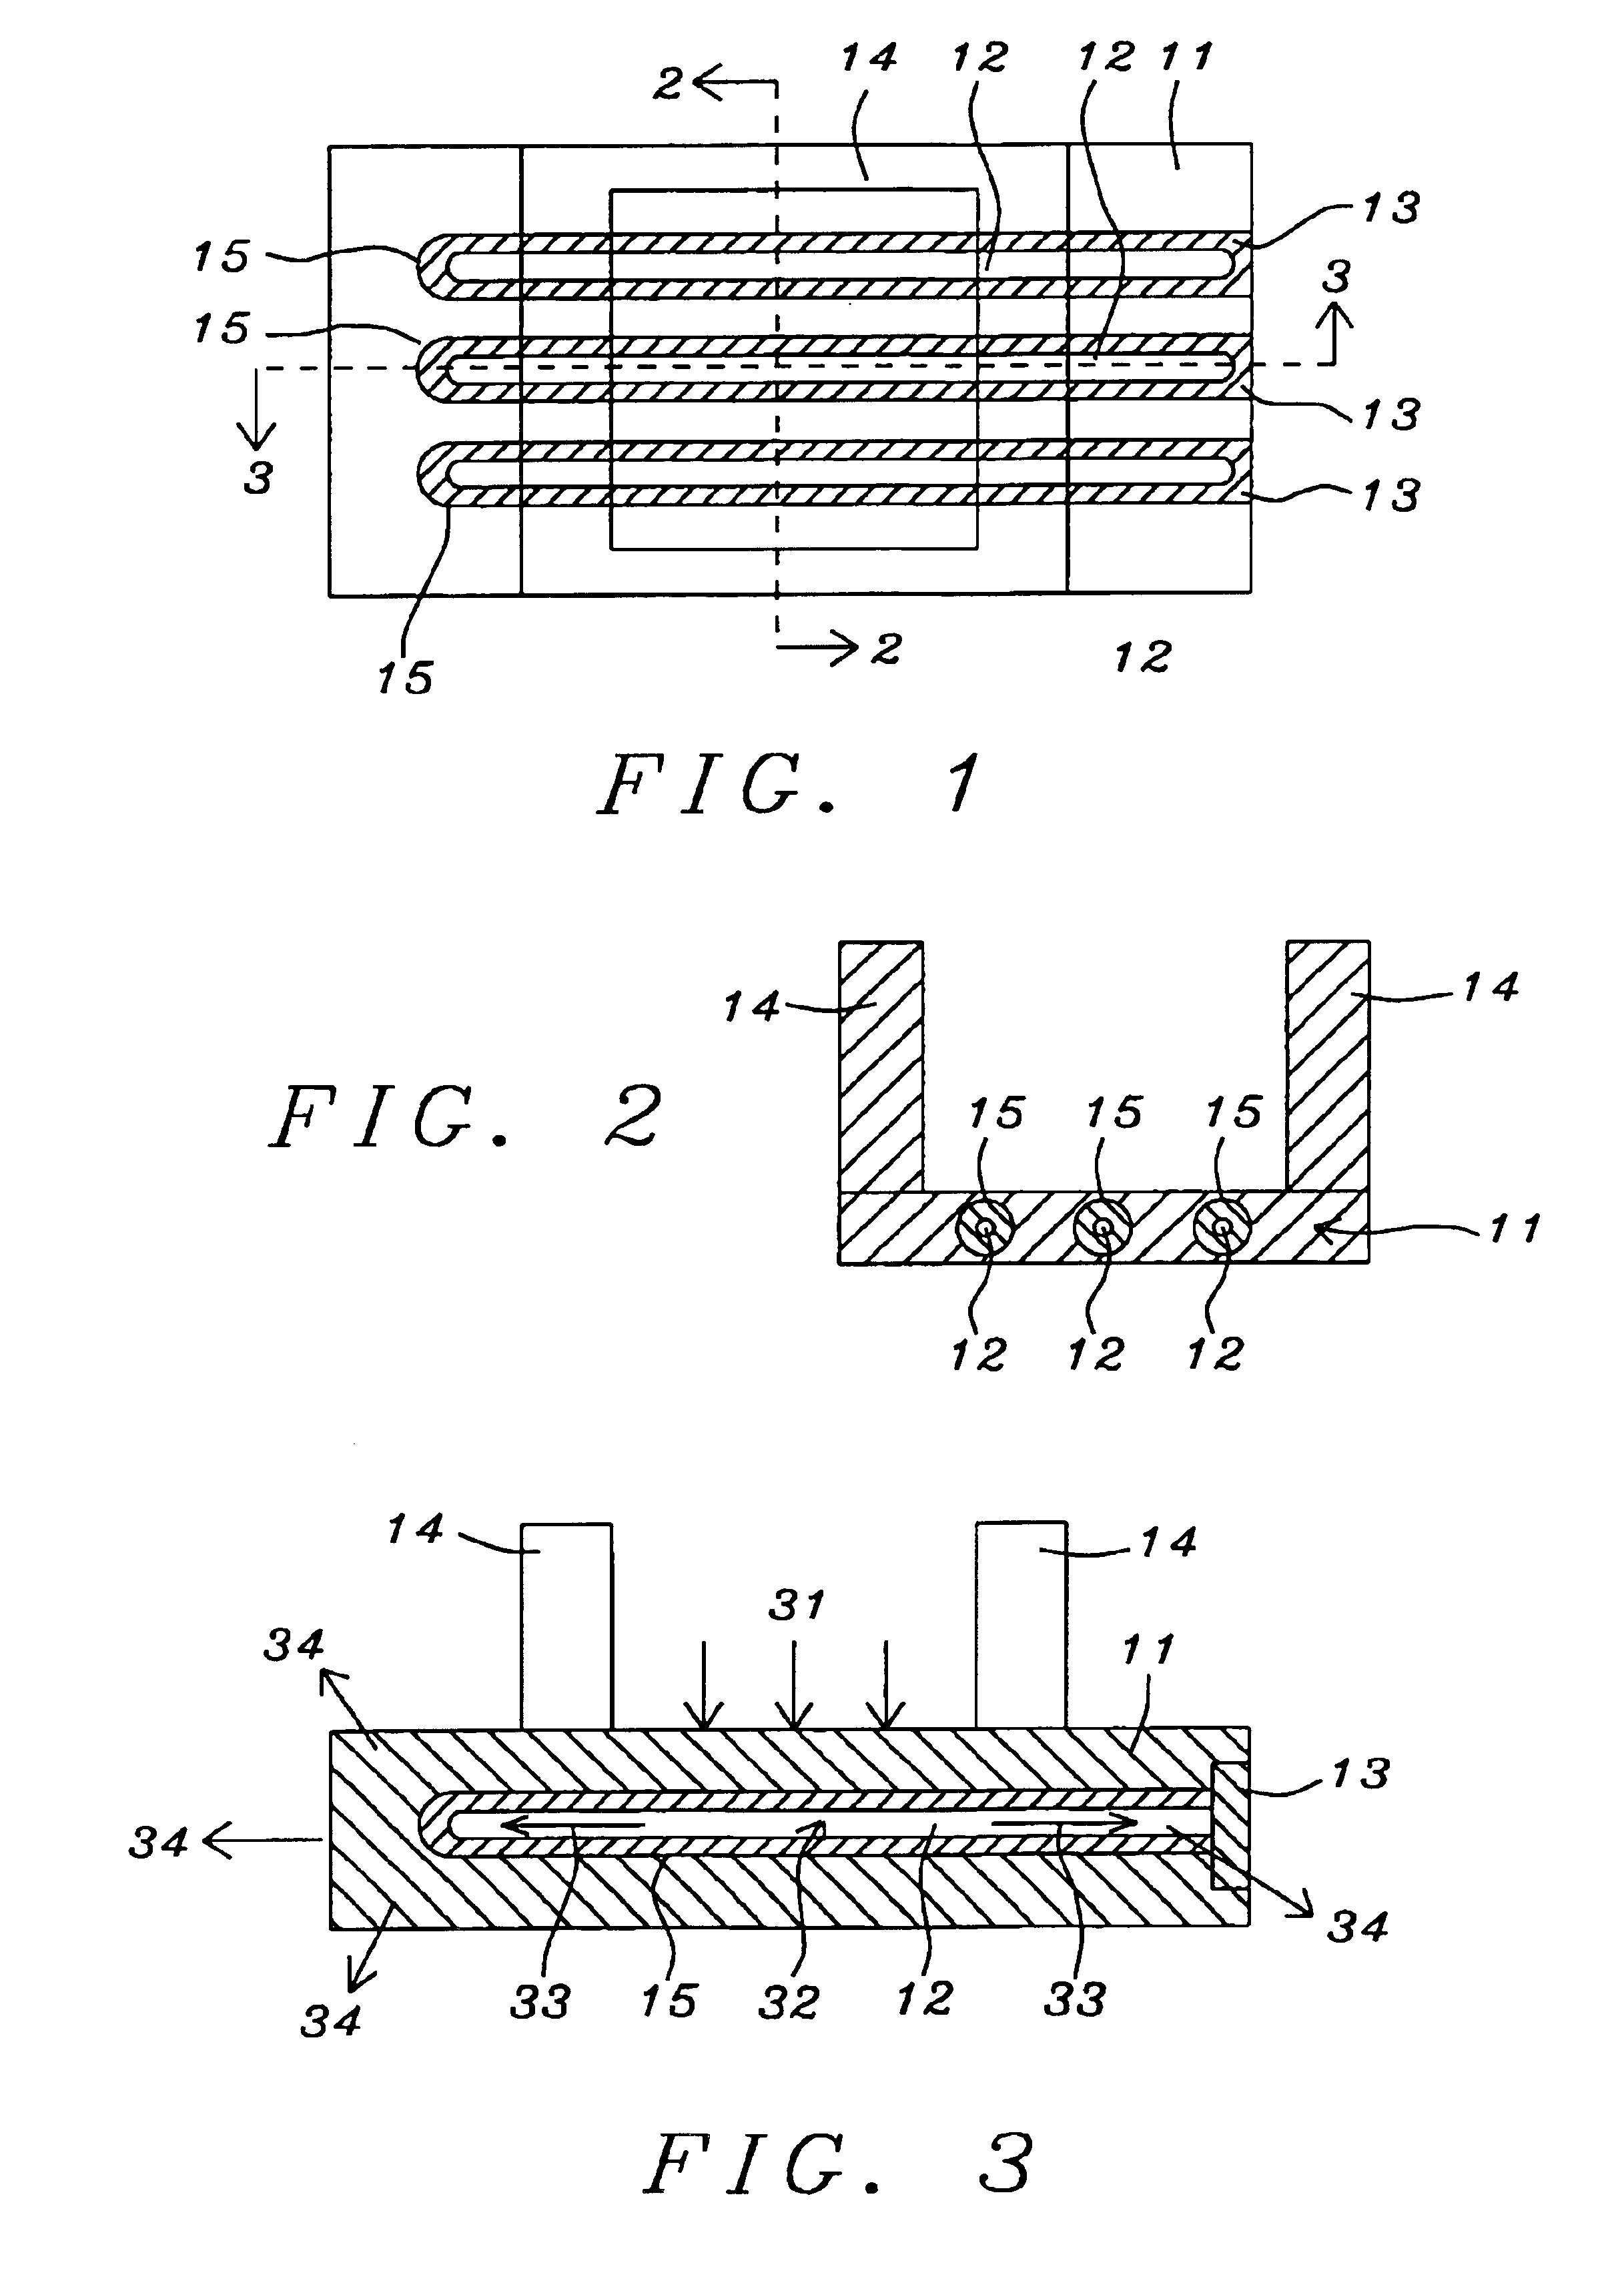 Advanced microelectronic heat dissipation package and method for its manufacture